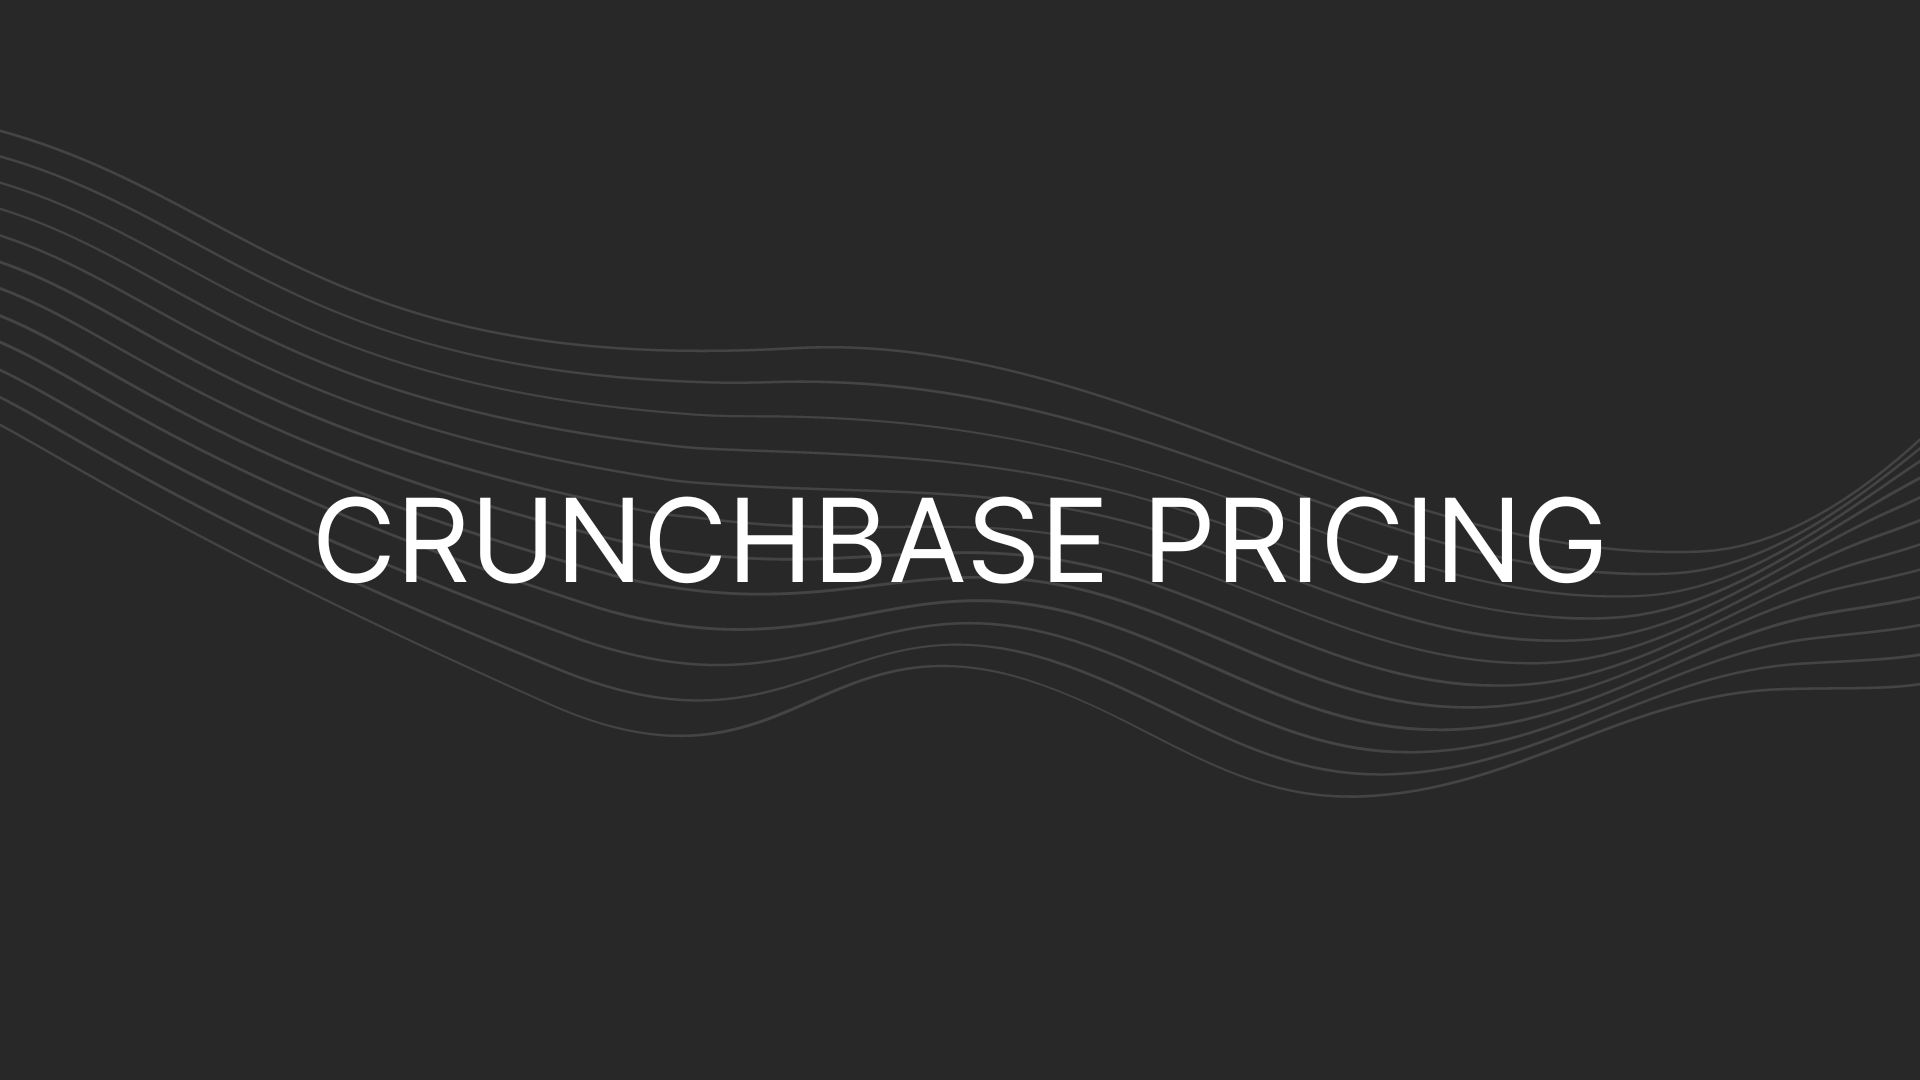 Crunchbase Pricing – Actual Prices For All Plans, Enterprise Too